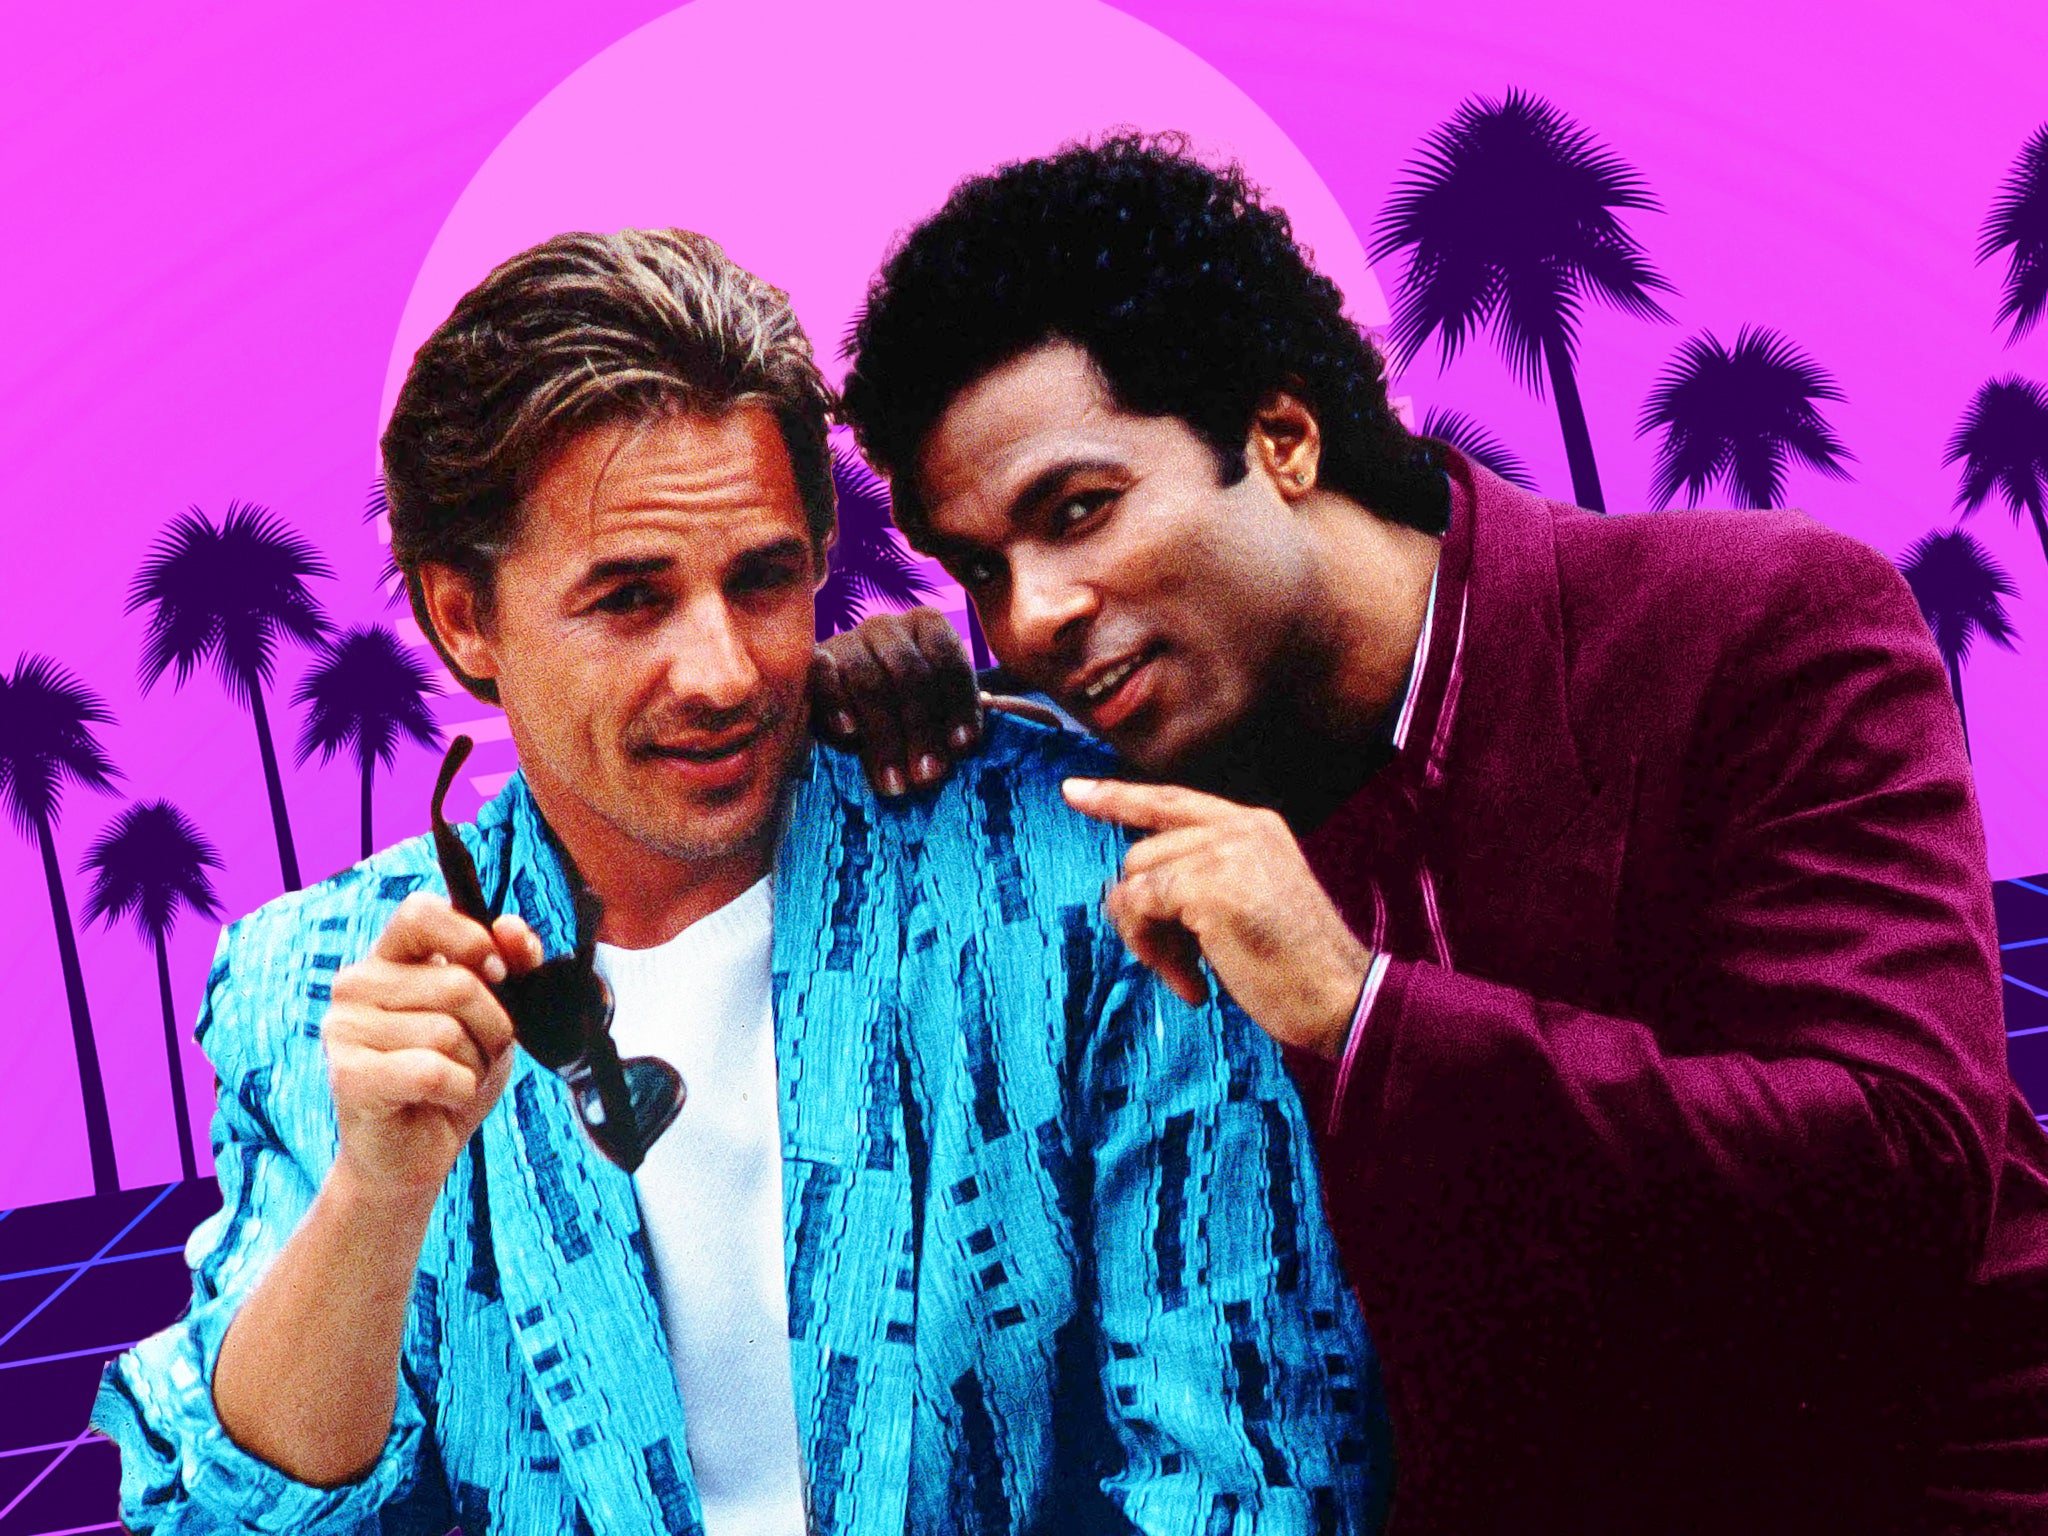 Cocaine, cars and Crockett 'n' Tubbs: Did we always underestimate Miami Vice?  | The Independent